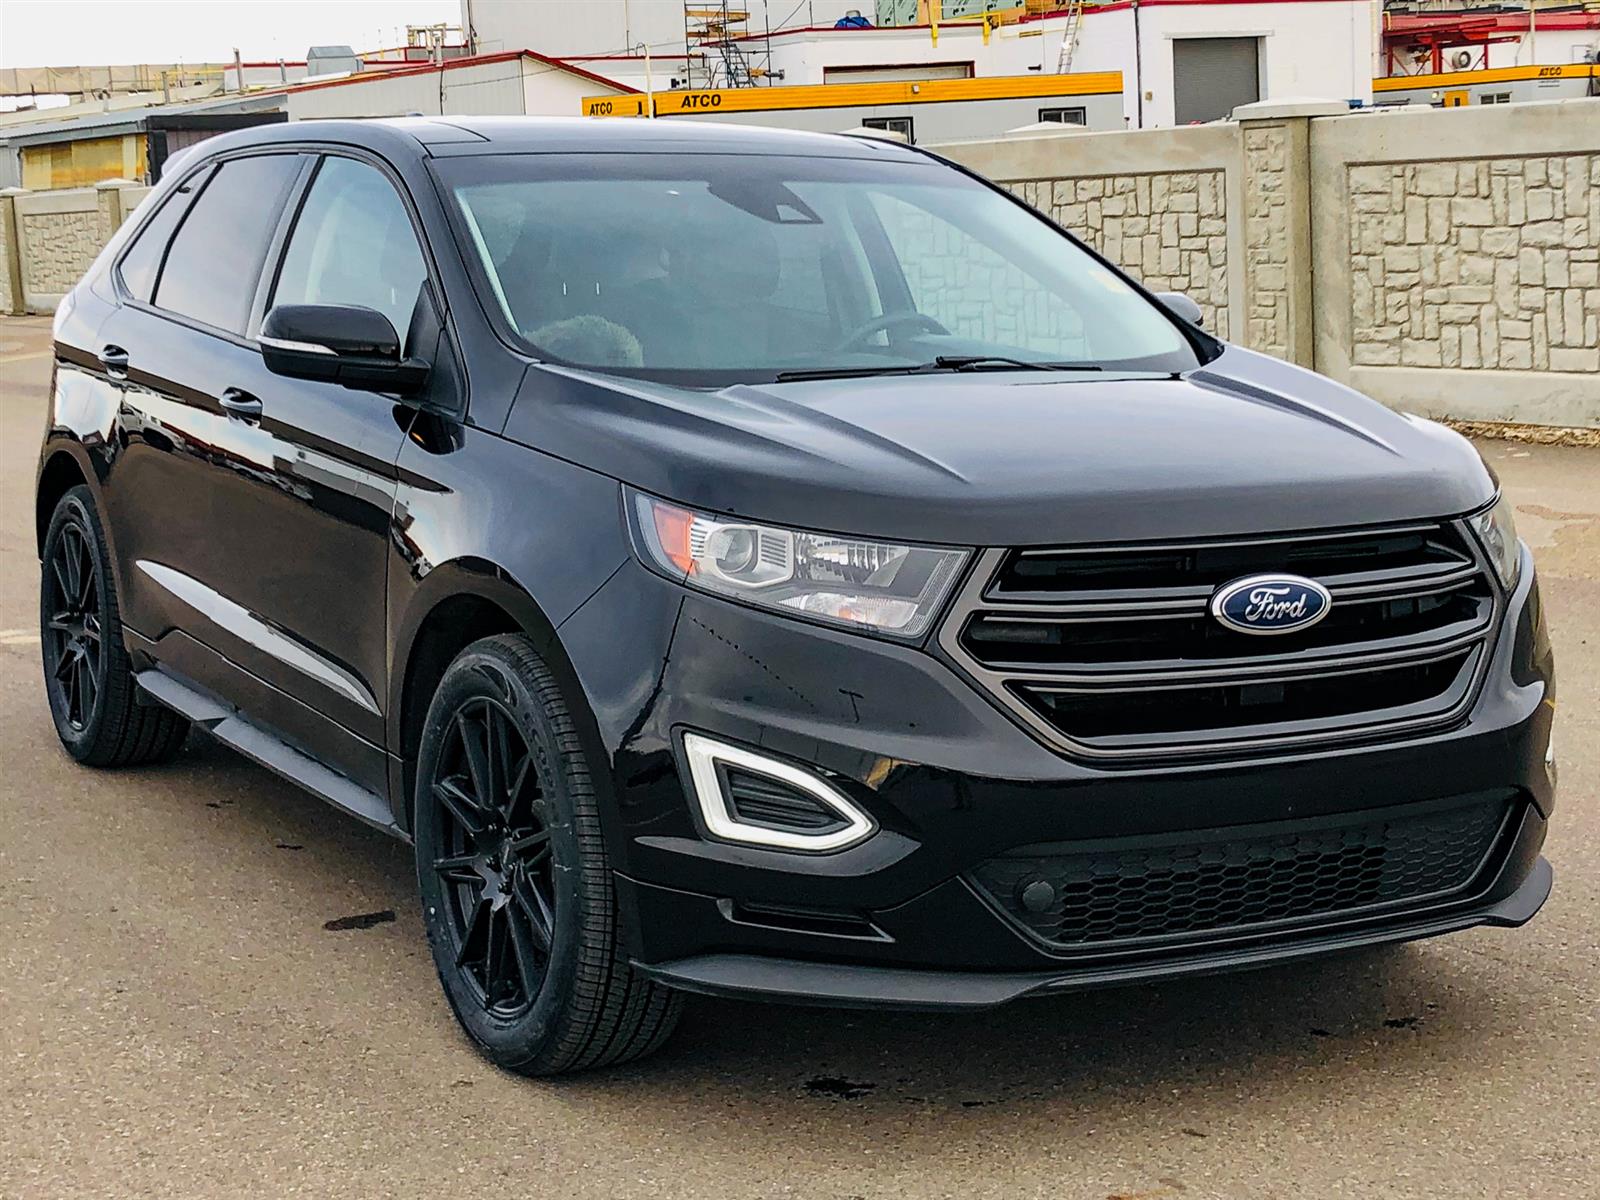 2018 Ford Edge SPORT | 2.7L V6 | AWD | PANORAMIC ROOF | HEATED STEERING WHEEL